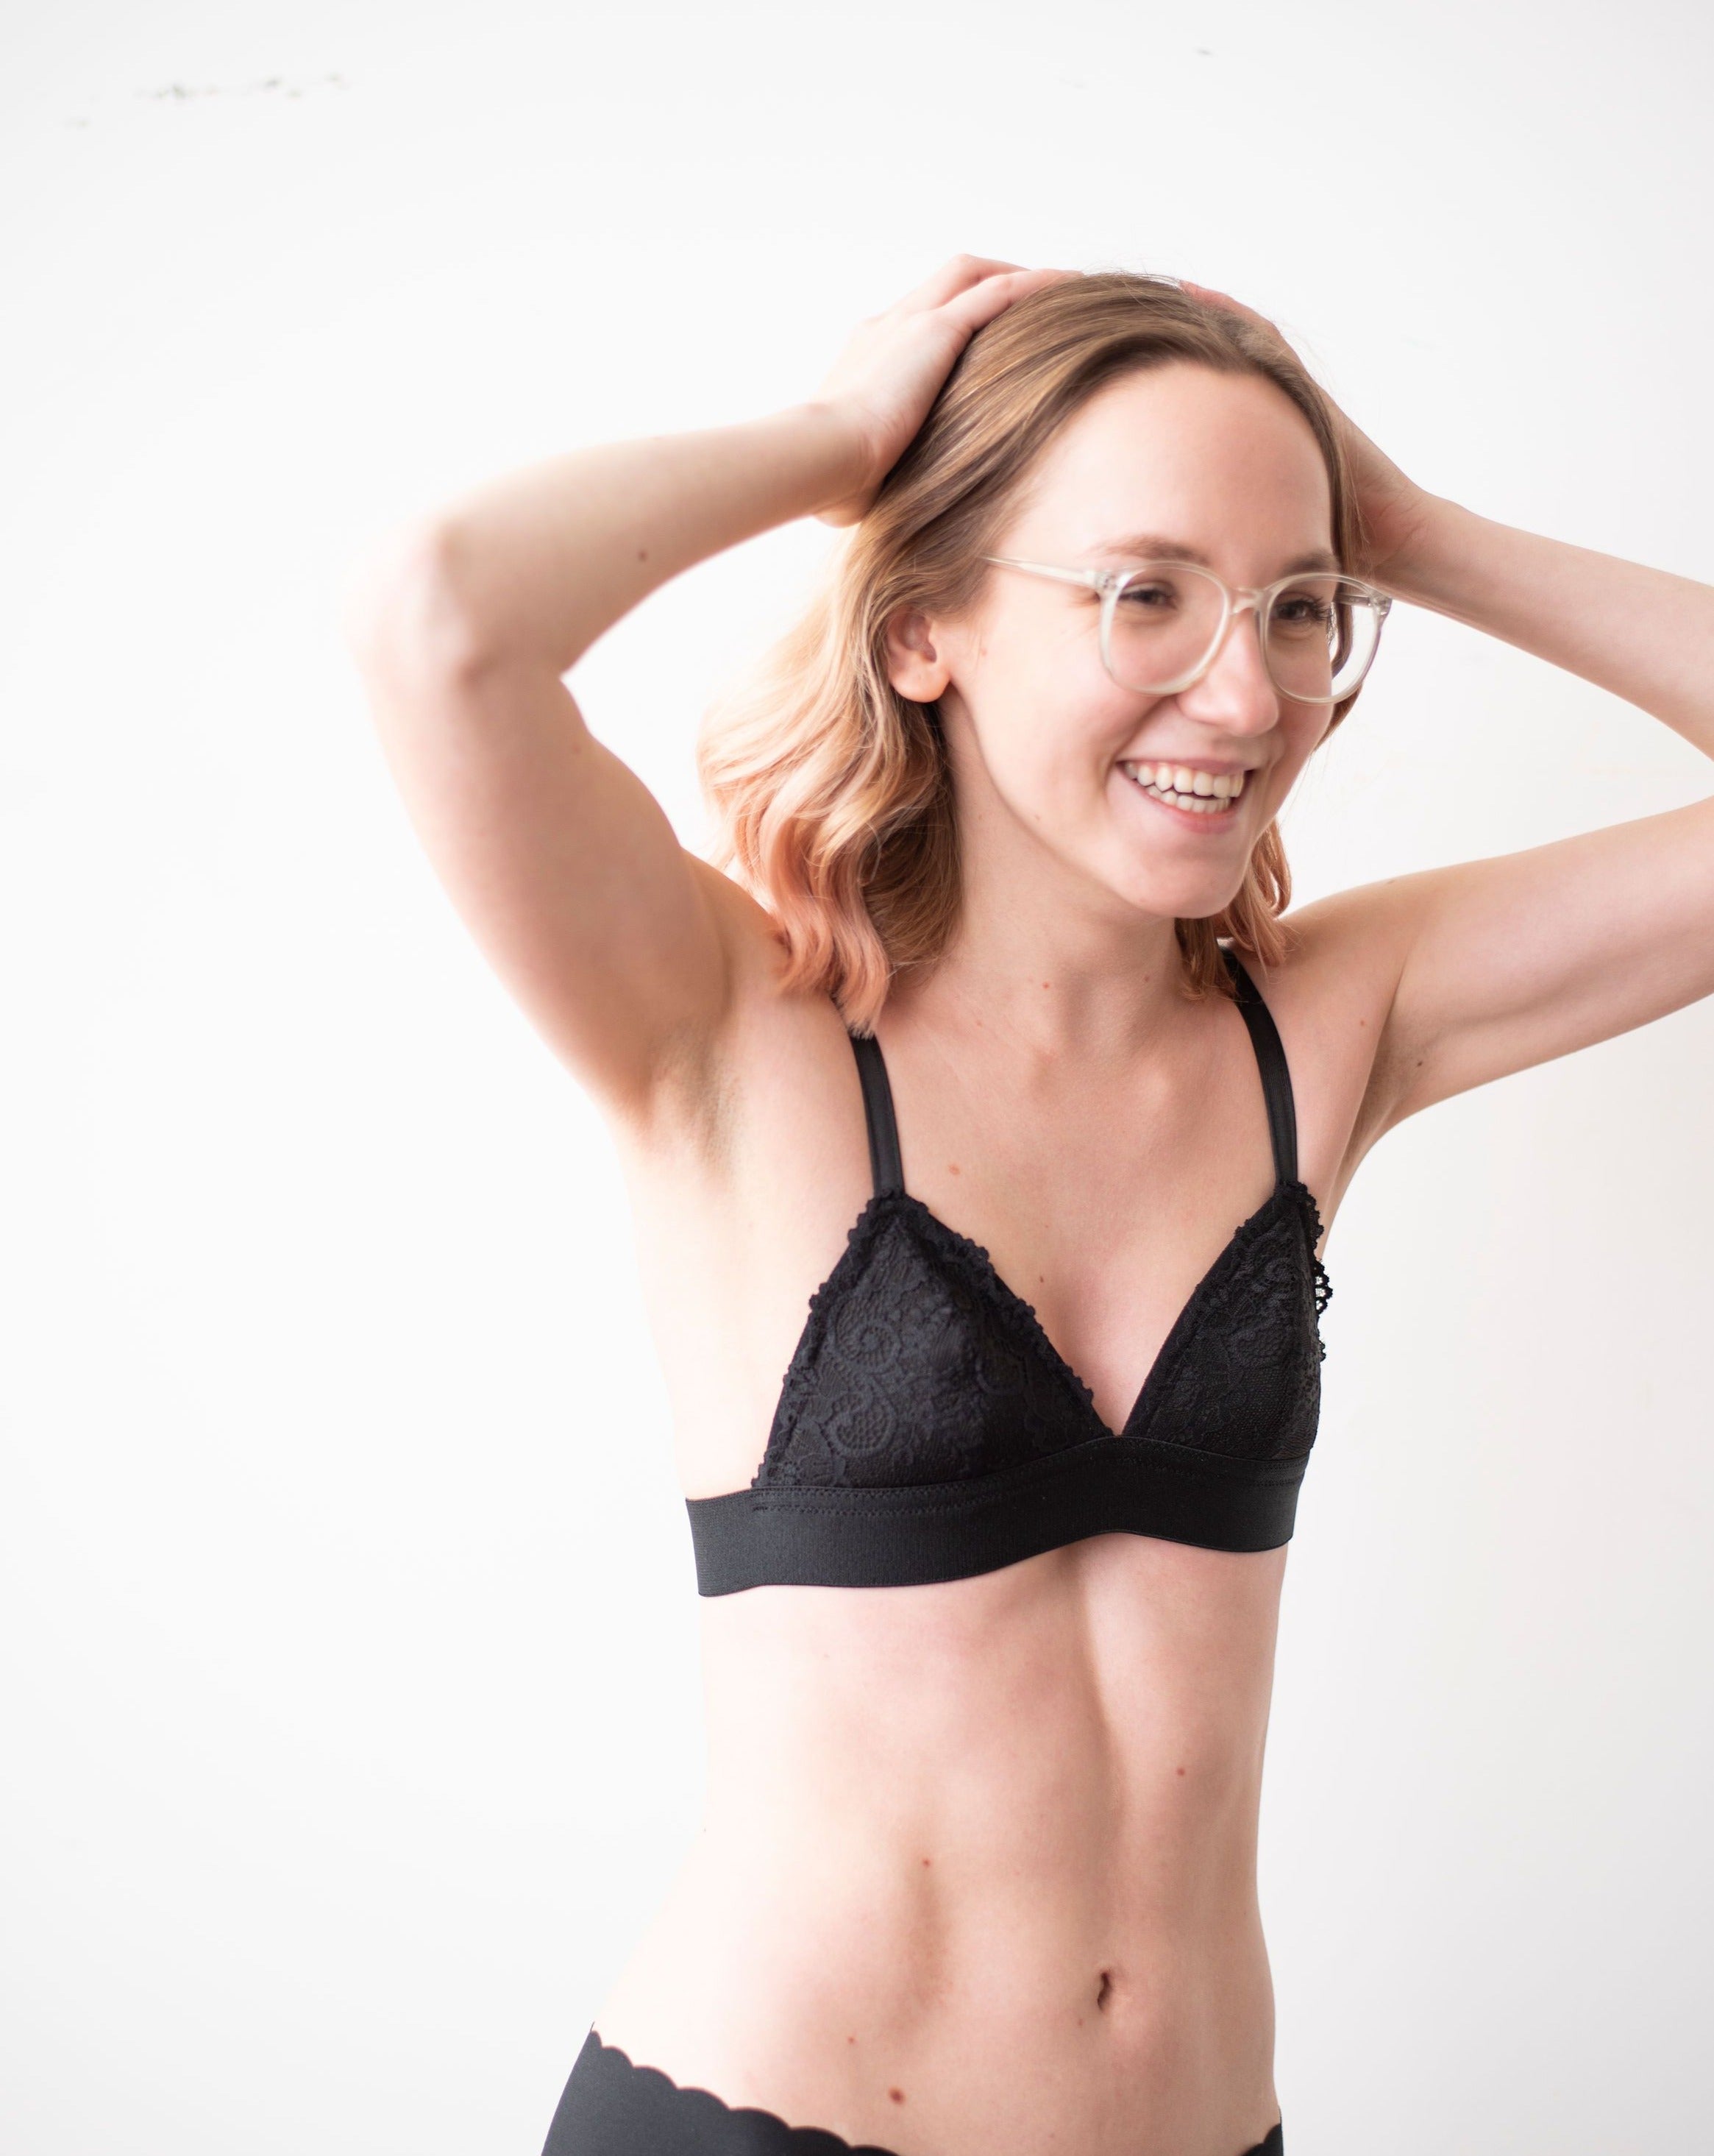 Young Blonde Woman Trying On Black Push Up Bra. Bosom Concept